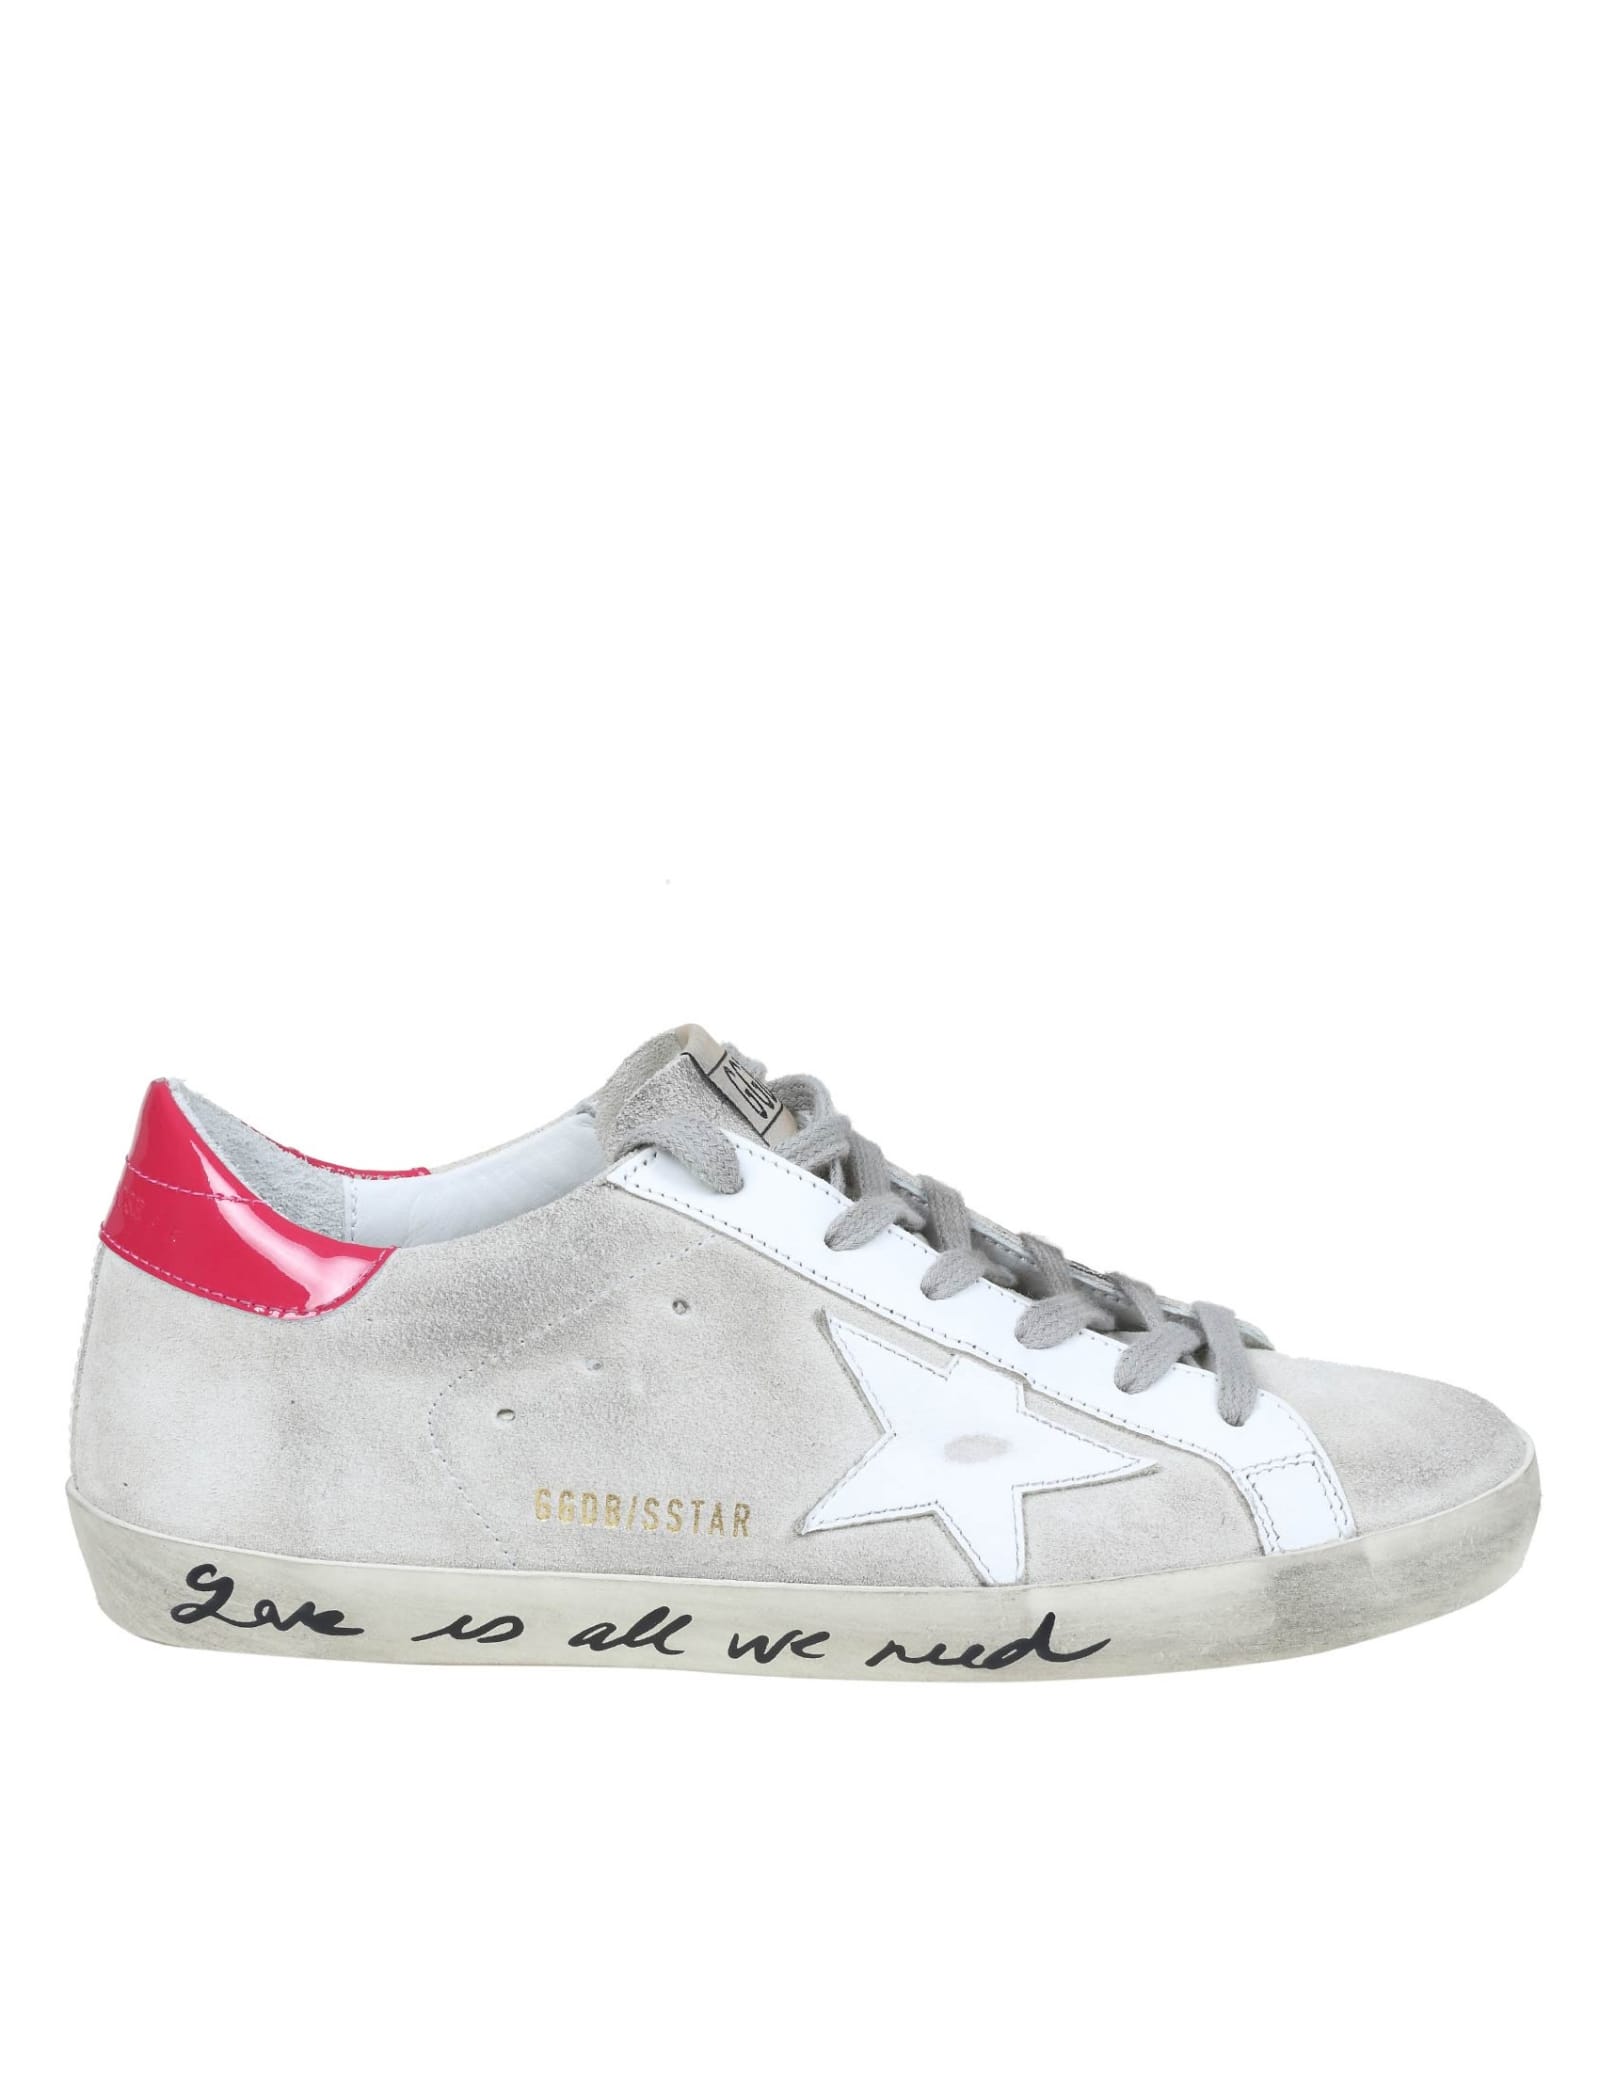 Buy Golden Goose Super Star Sneakers In Ice Color Suede online, shop Golden Goose shoes with free shipping